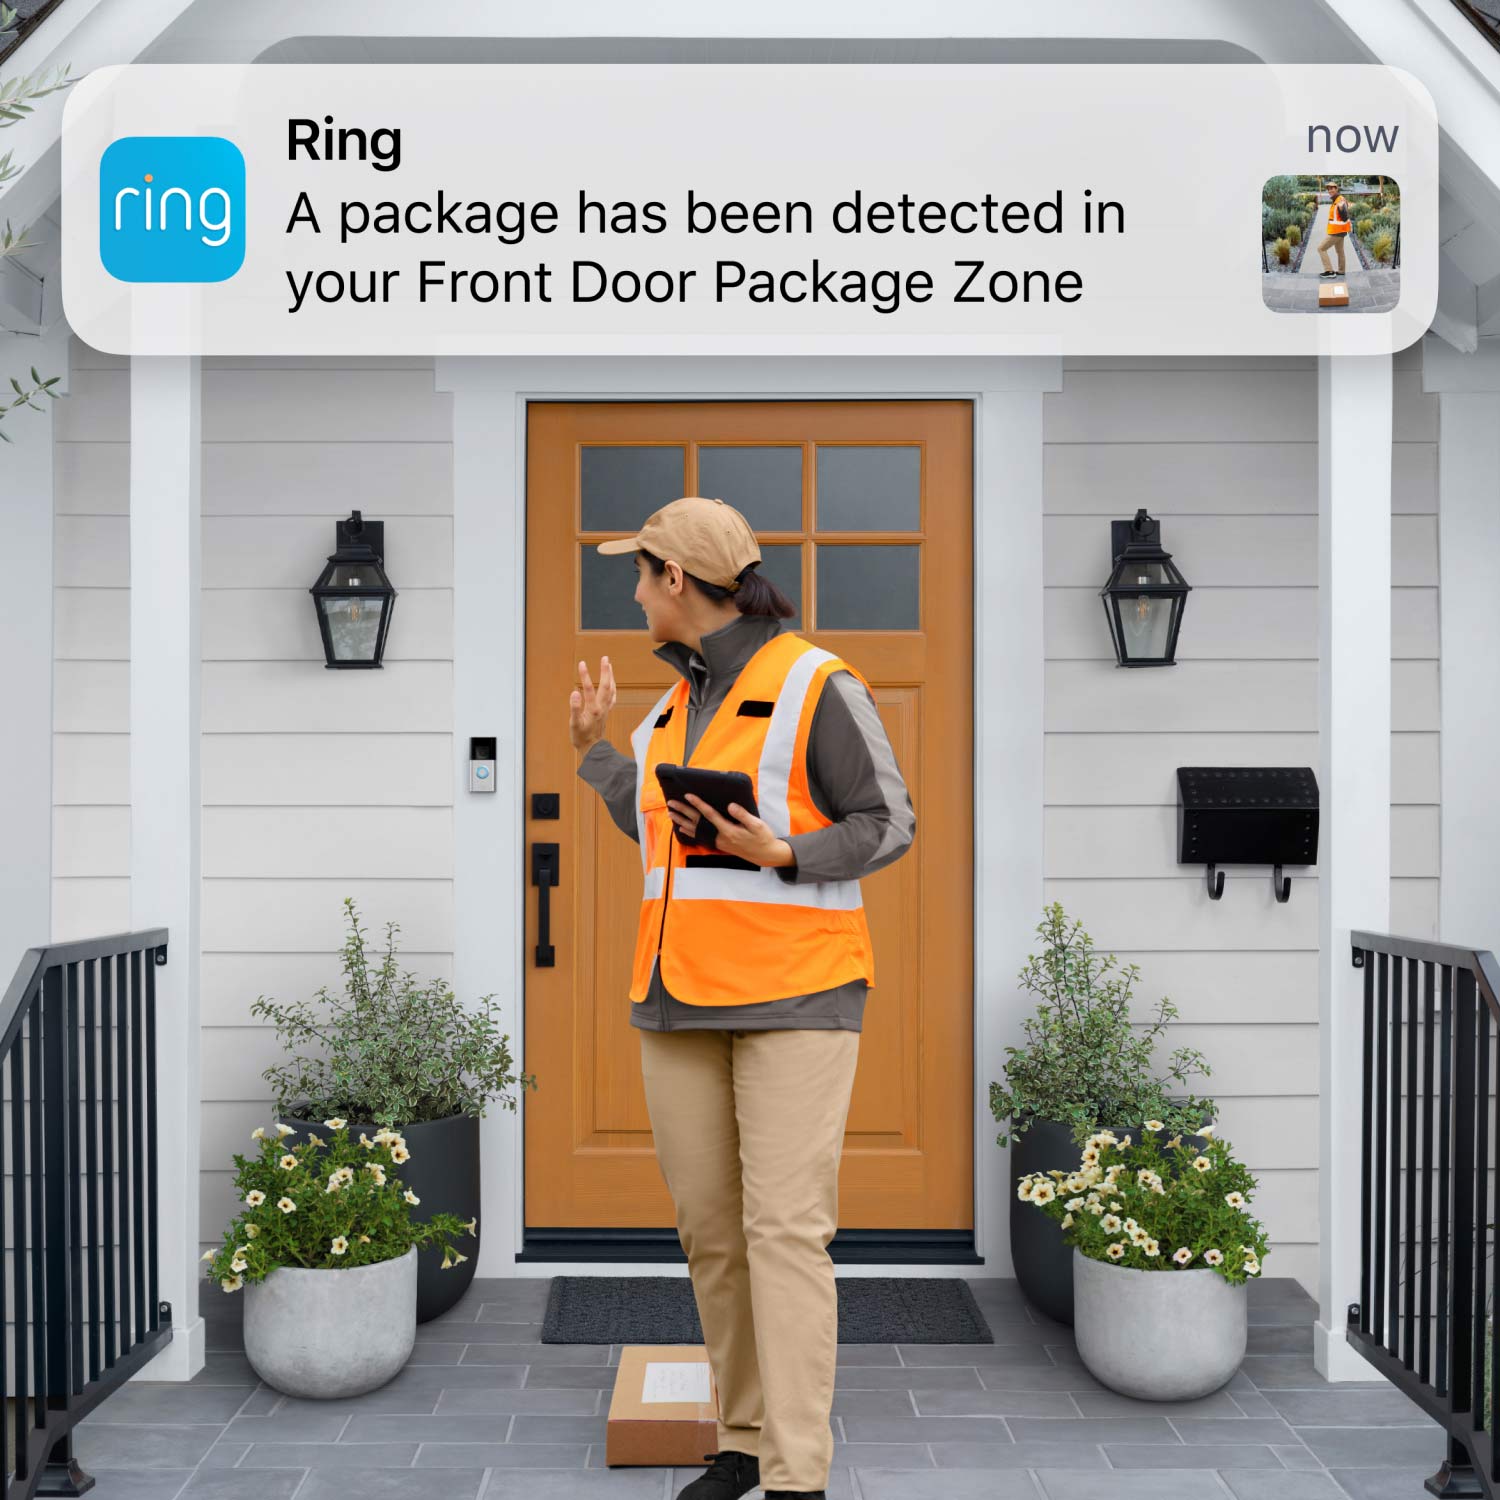 Battery Doorbell Plus - Person waving at doorbell camera after package delivery. Notification reads: 